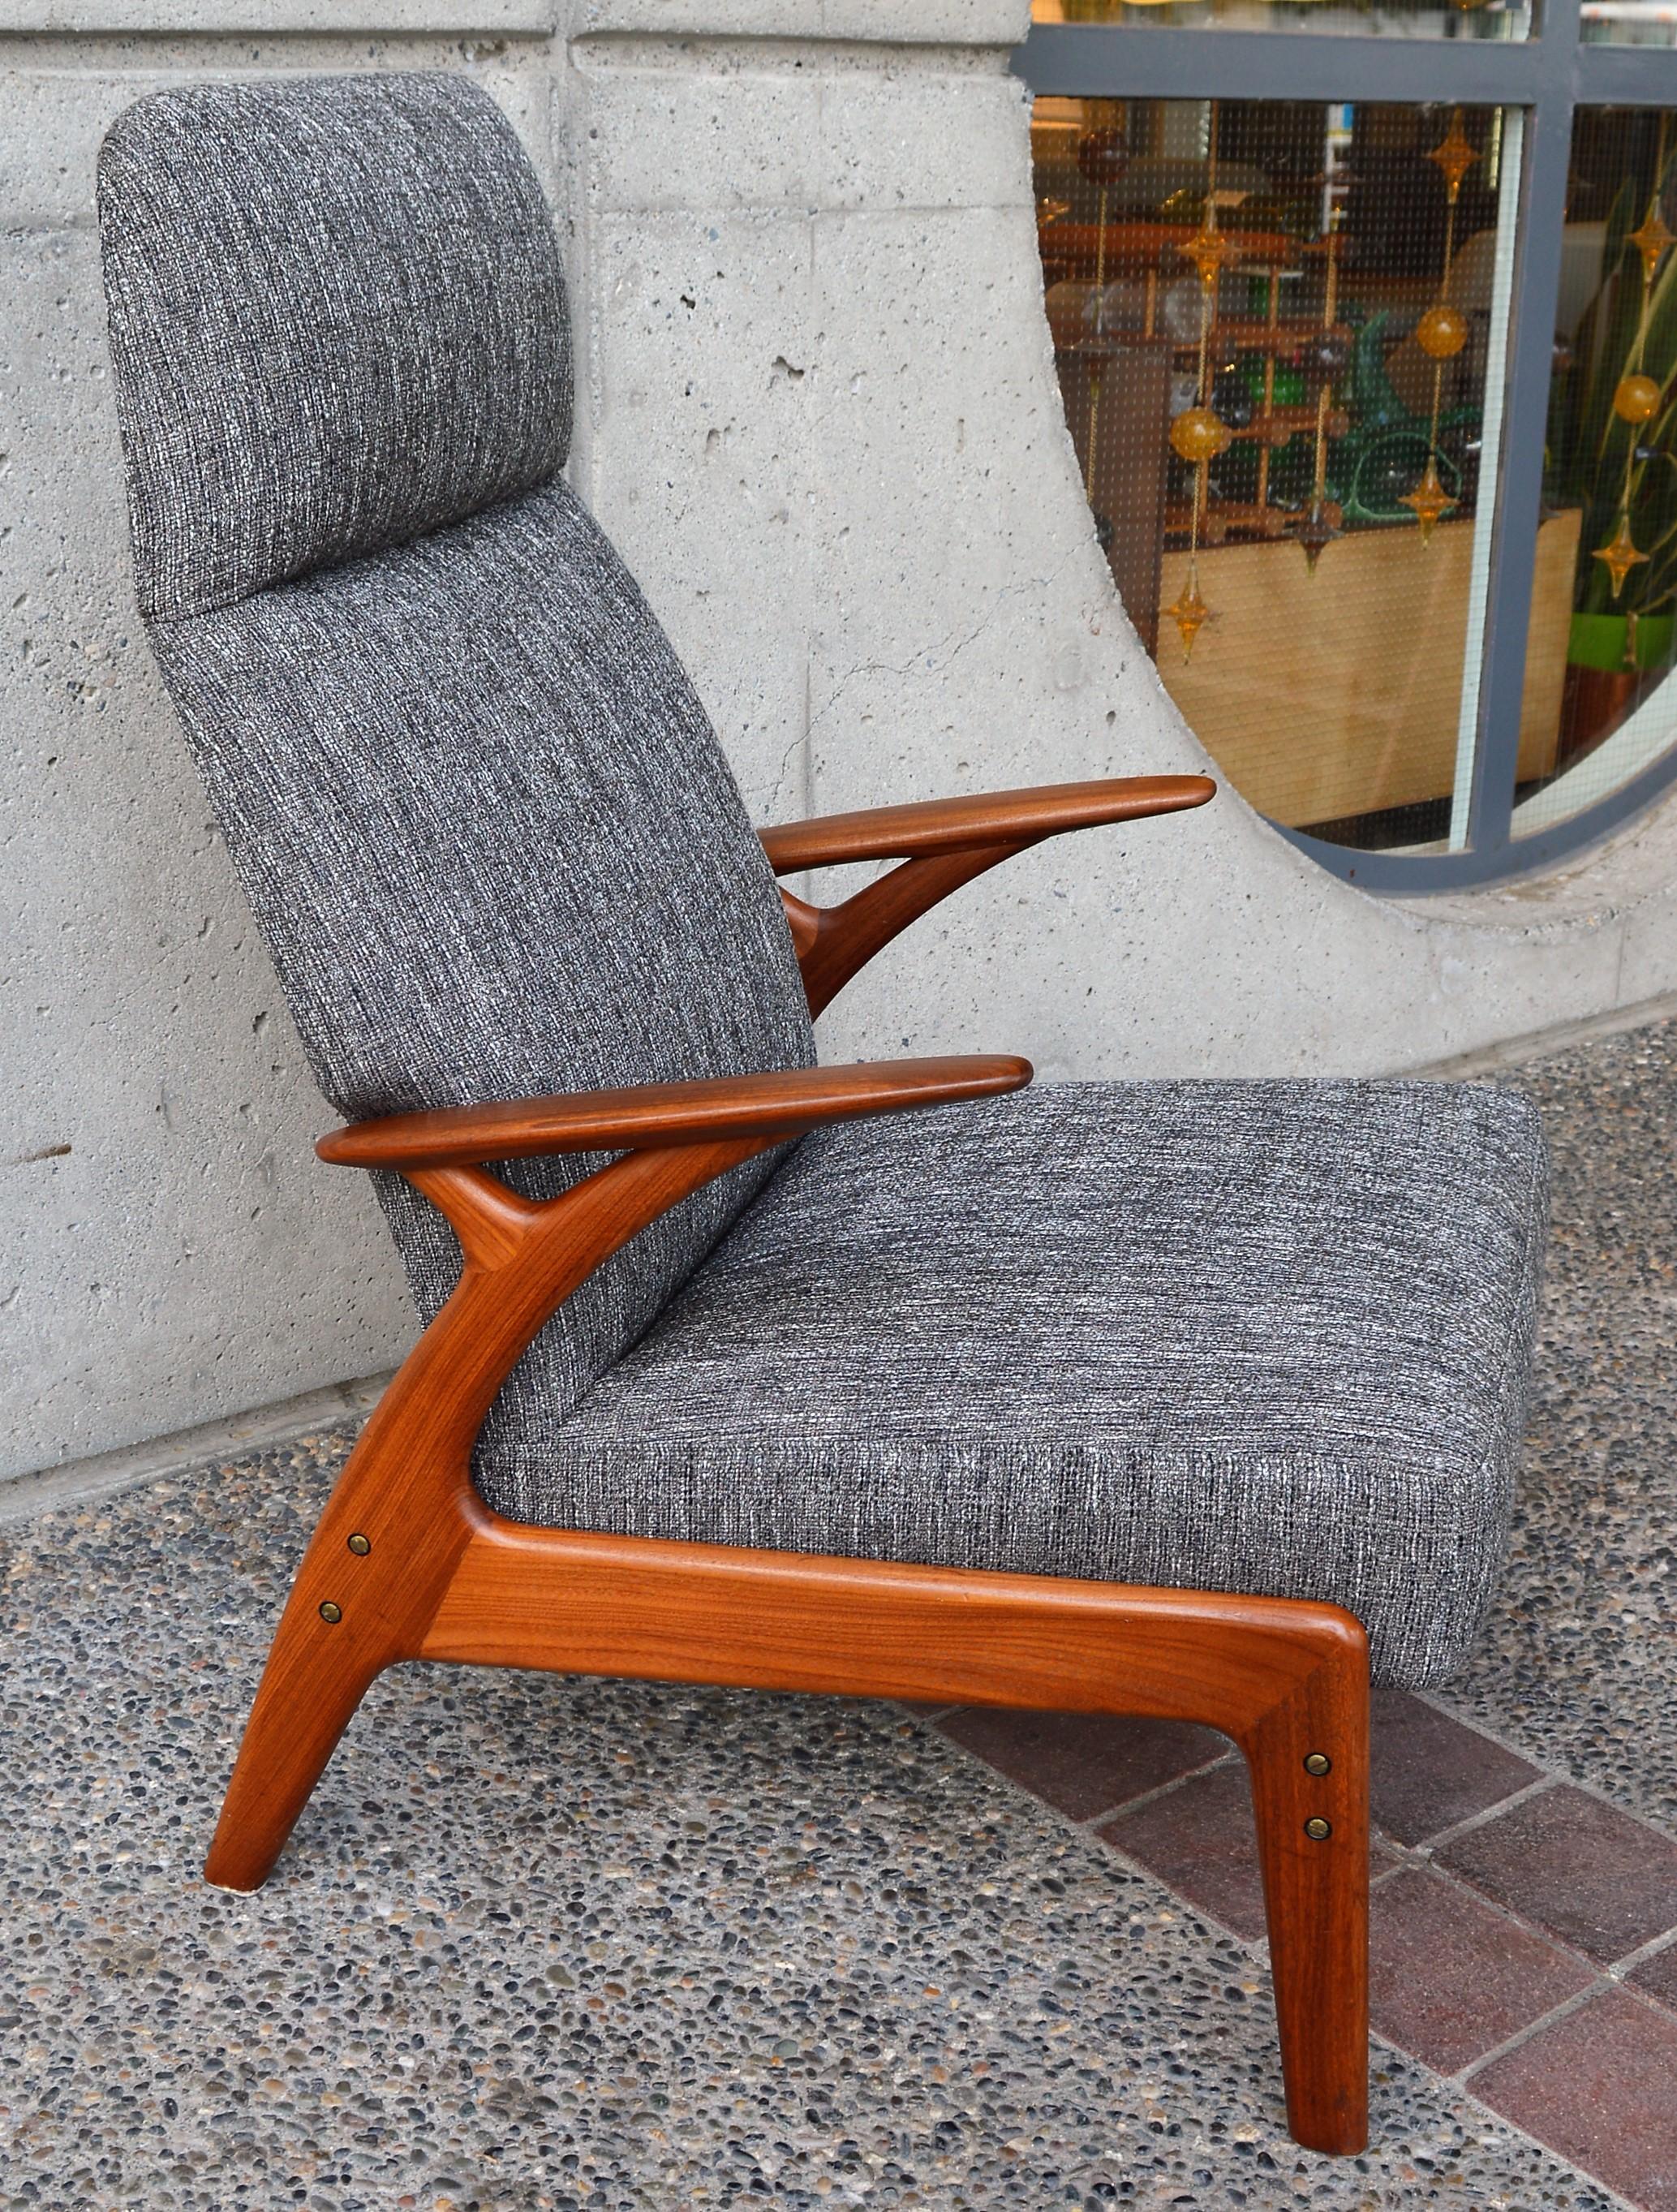 This killer Danish modern teak sexy version of a Lazyboy recliner has incredible lines and rich wood tones. Featuring the flared Y shaped braces that support the ovoid arm rests that fit in just the right place, a clever mechanism to hide the